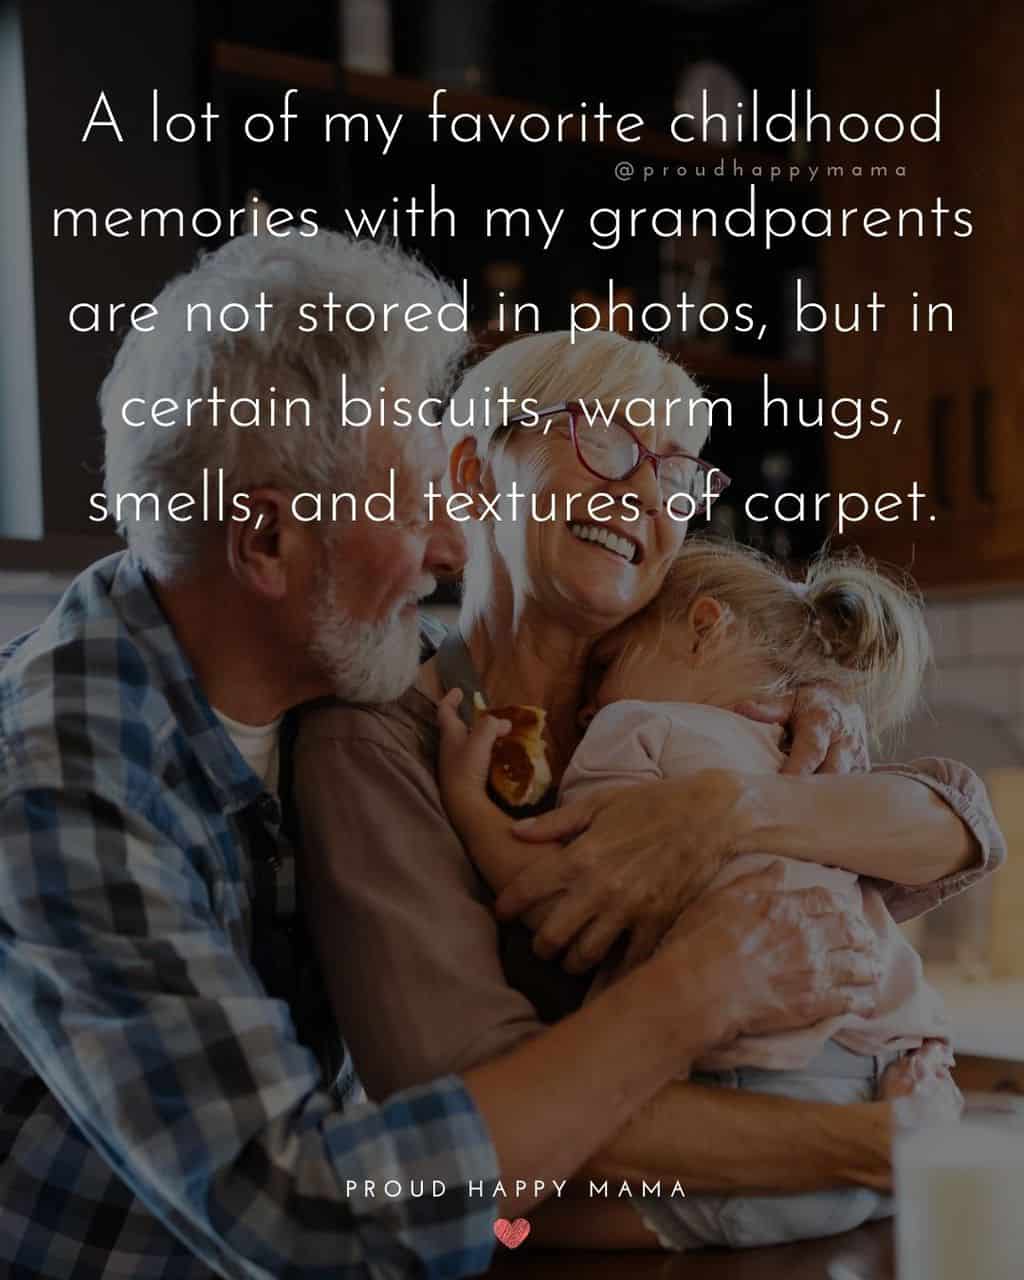 Grandparent Quotes – A lot of my favorite childhood memories with my grandparents are not stored in photos, but in certain